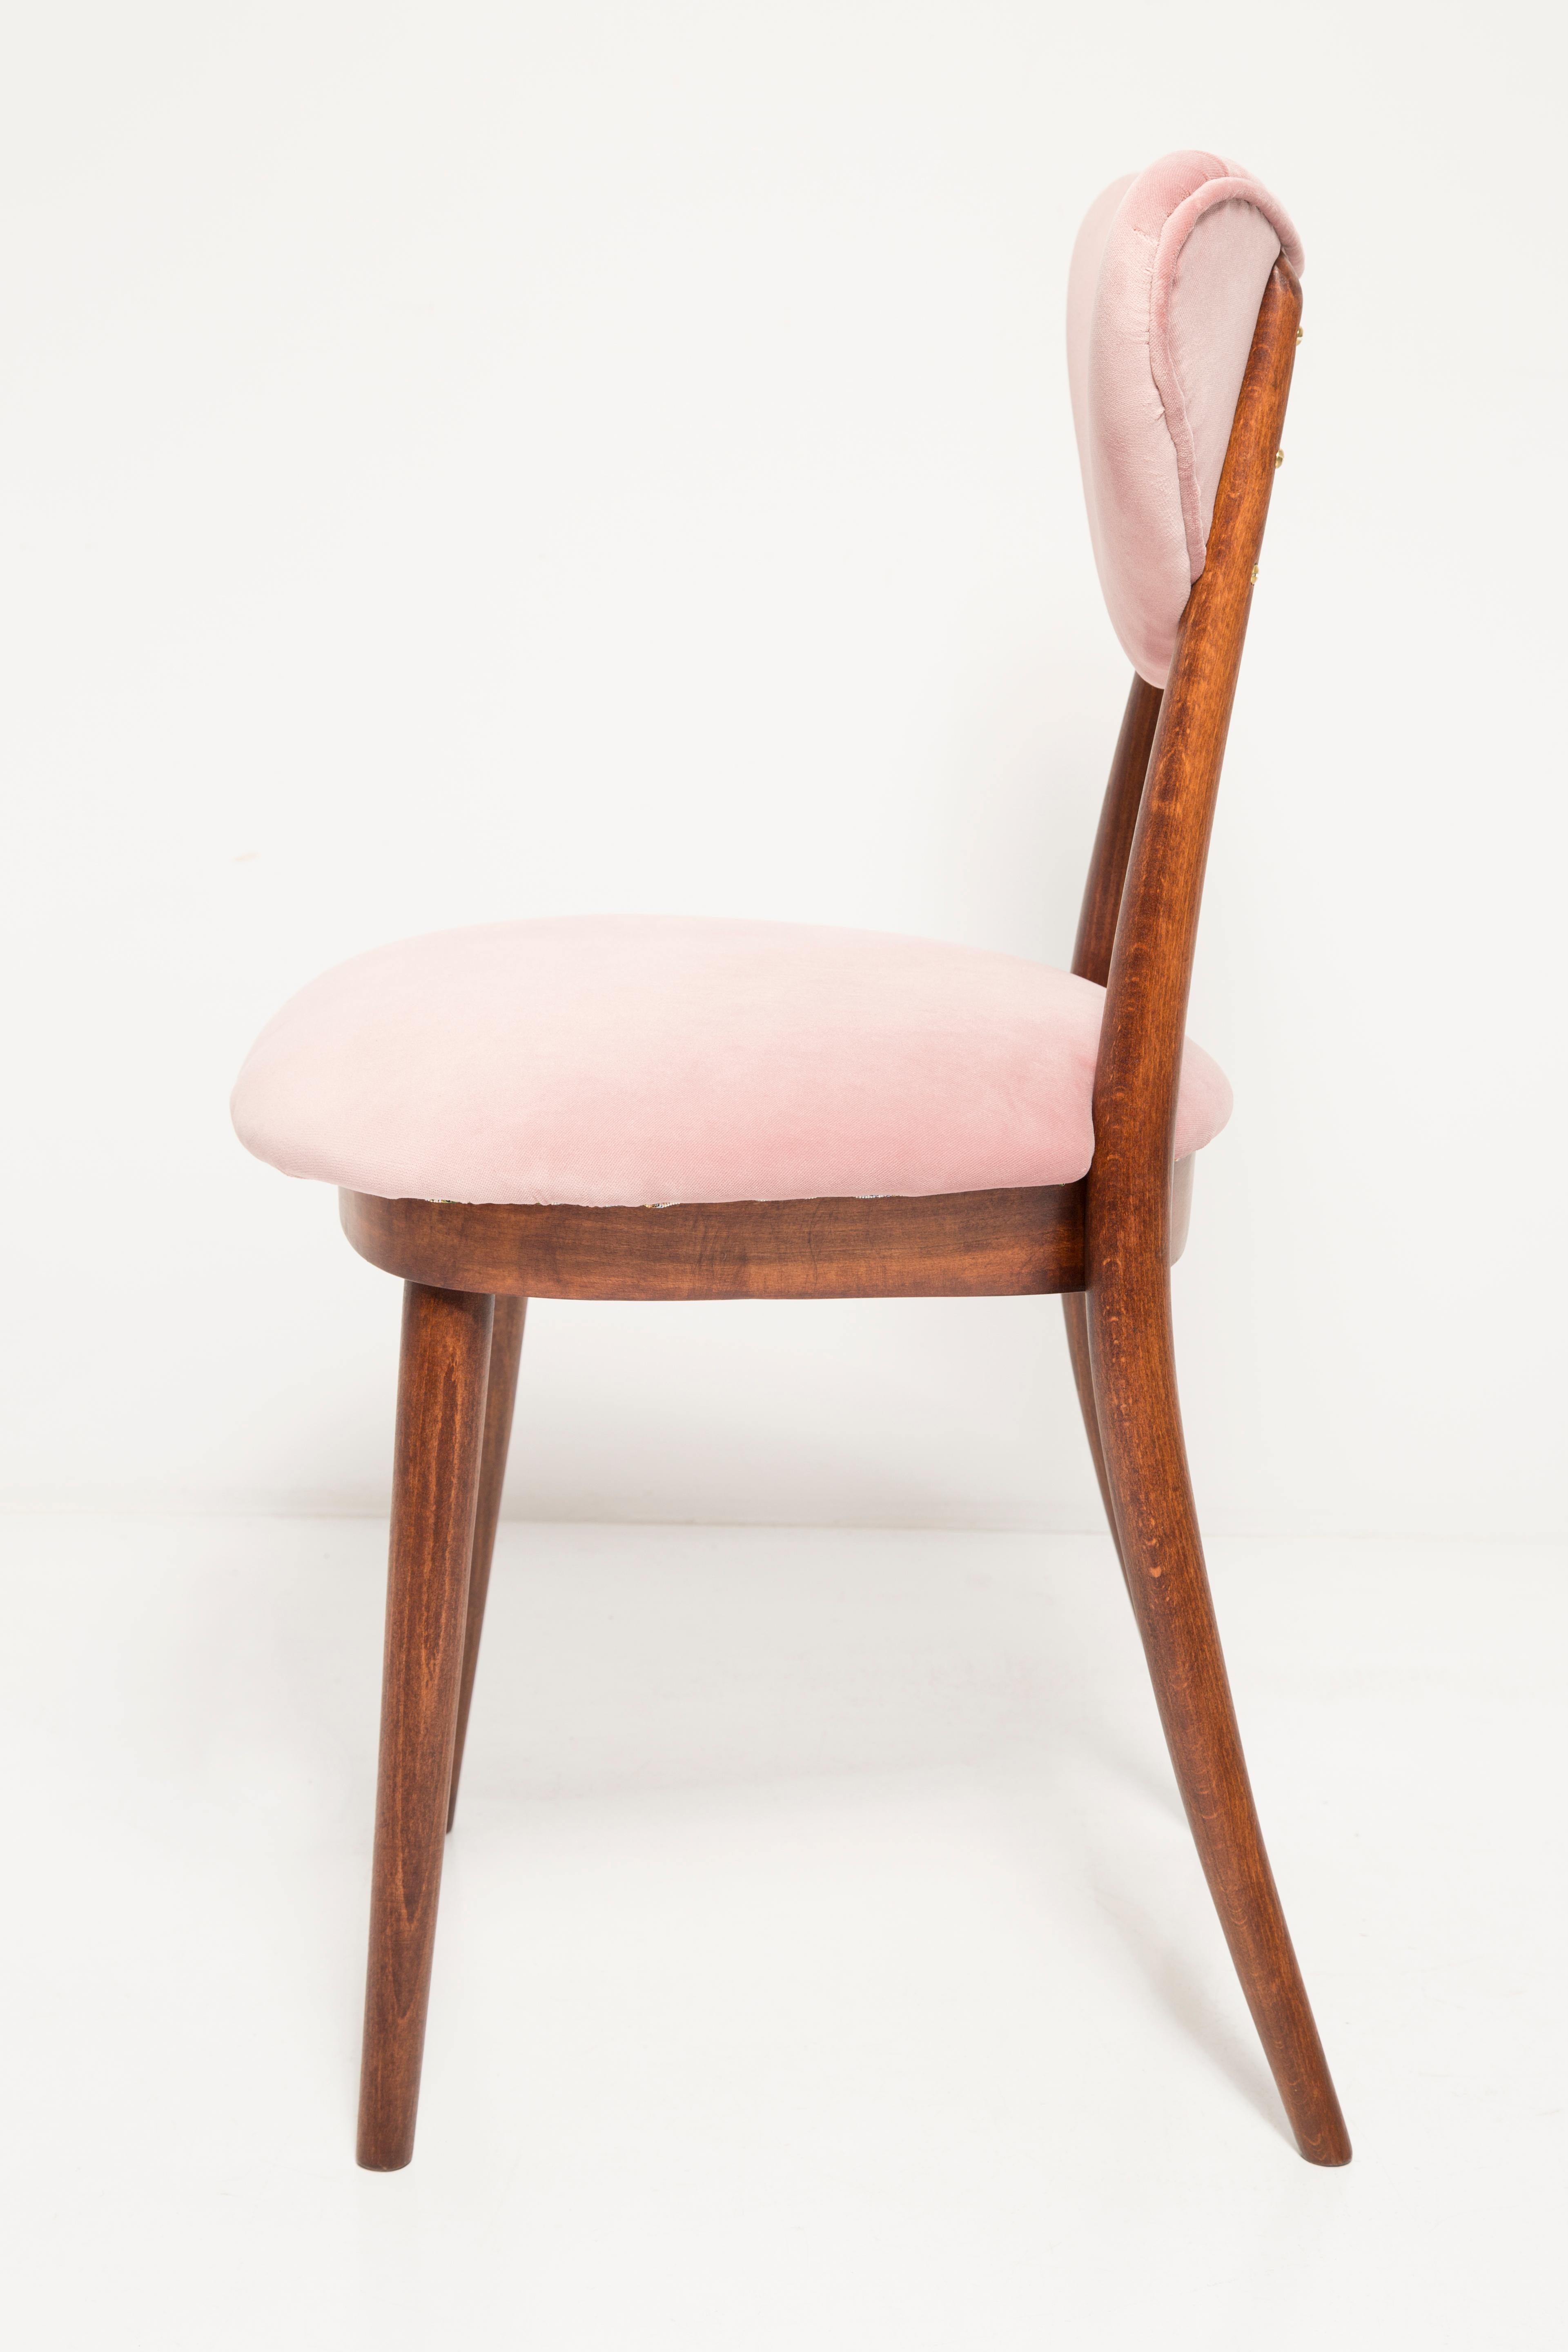 Hand-Crafted Mid Century Light Pink Velvet Heart Chair, Europe, 1960s For Sale